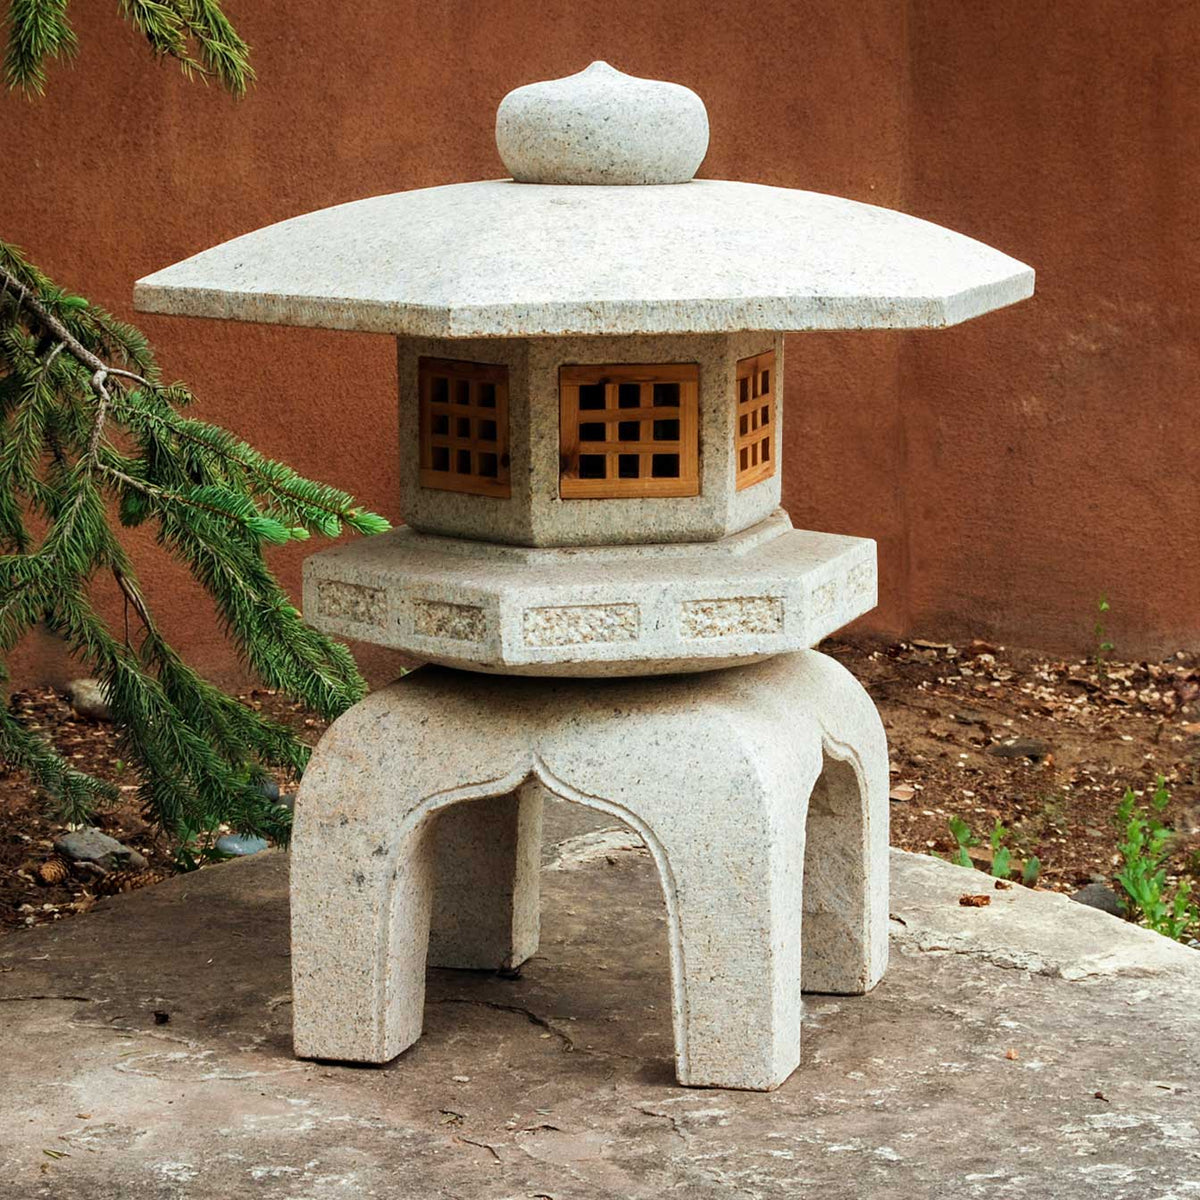 Stone Forest Antique Yukimi: hand-carved, traditional Japanese lantern made of beige granite.  image 2 of 4